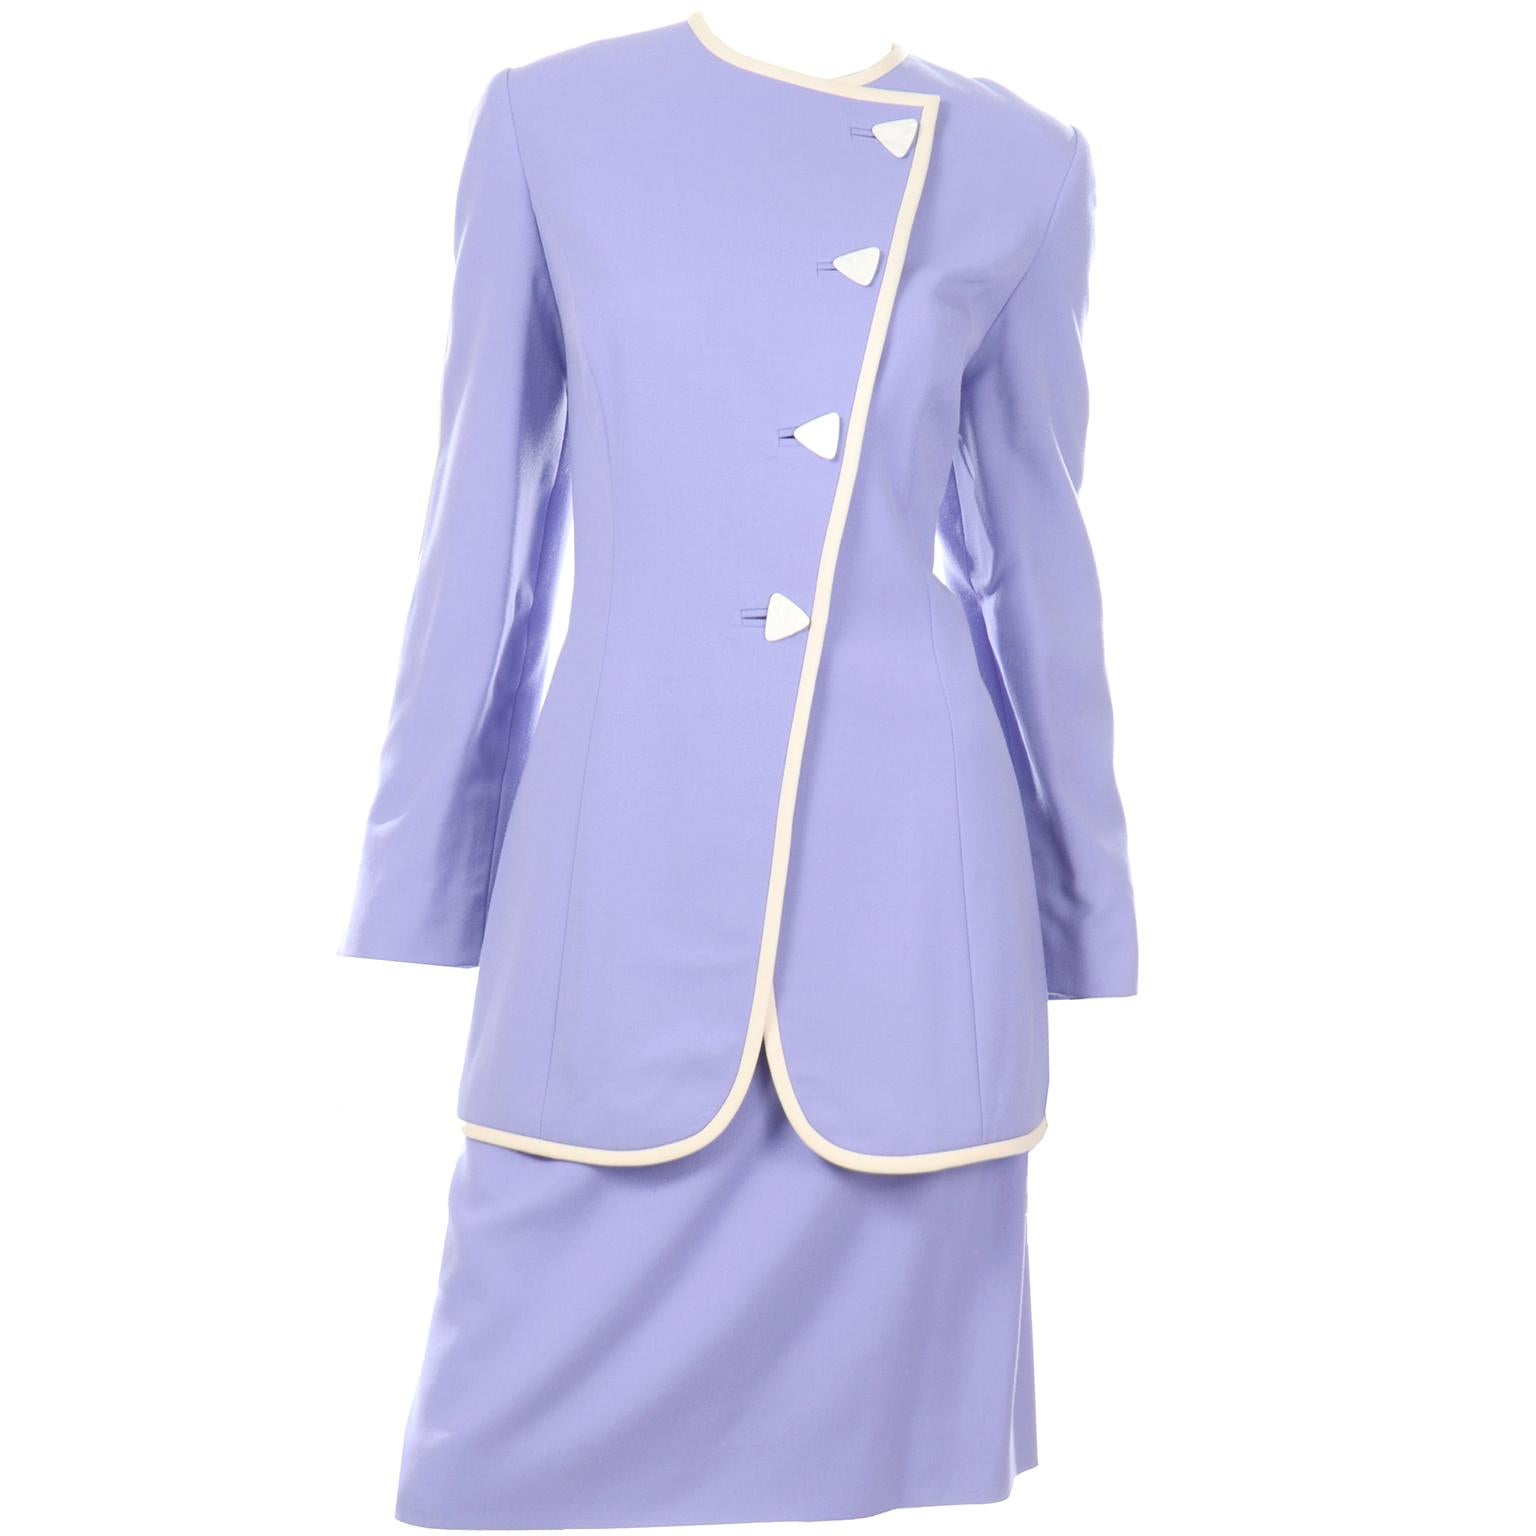 This is such a pretty David Hayes vintage 2 piece suit with a  longline blazer style jacket and a straight skirt. The jacket is fully lined, has a round neck, and closes with unique shell triangle buttons. The periwinkle bluish purple color of the